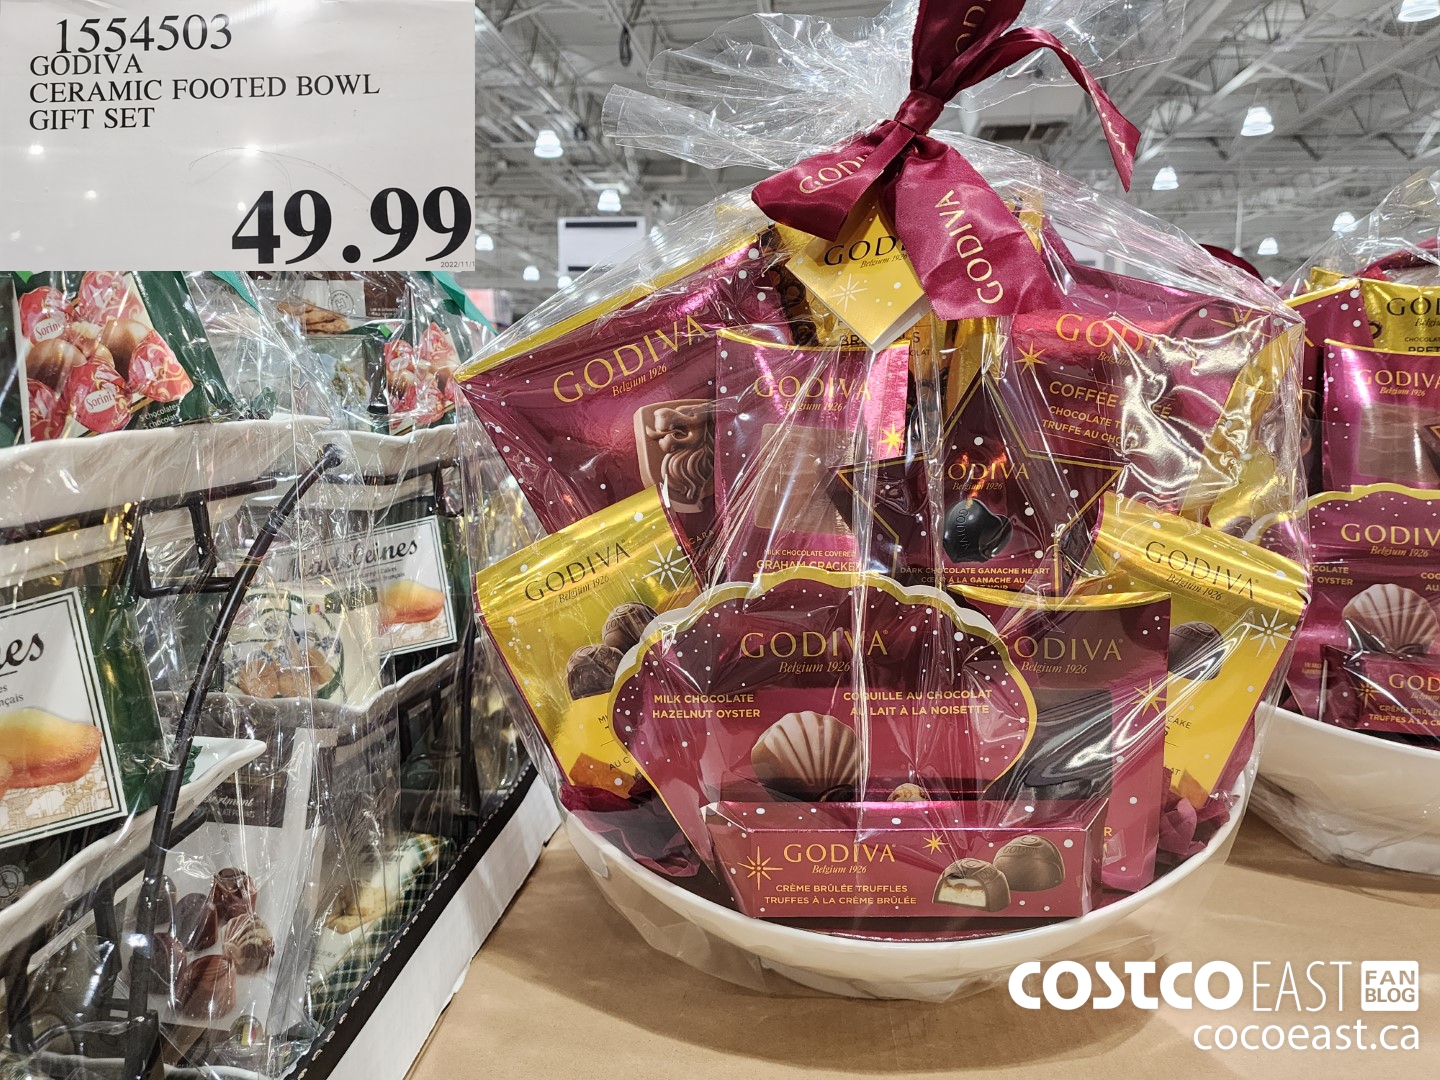 Costco Fans Can't Wait To Grab This Decorative Ceramic Serving Set